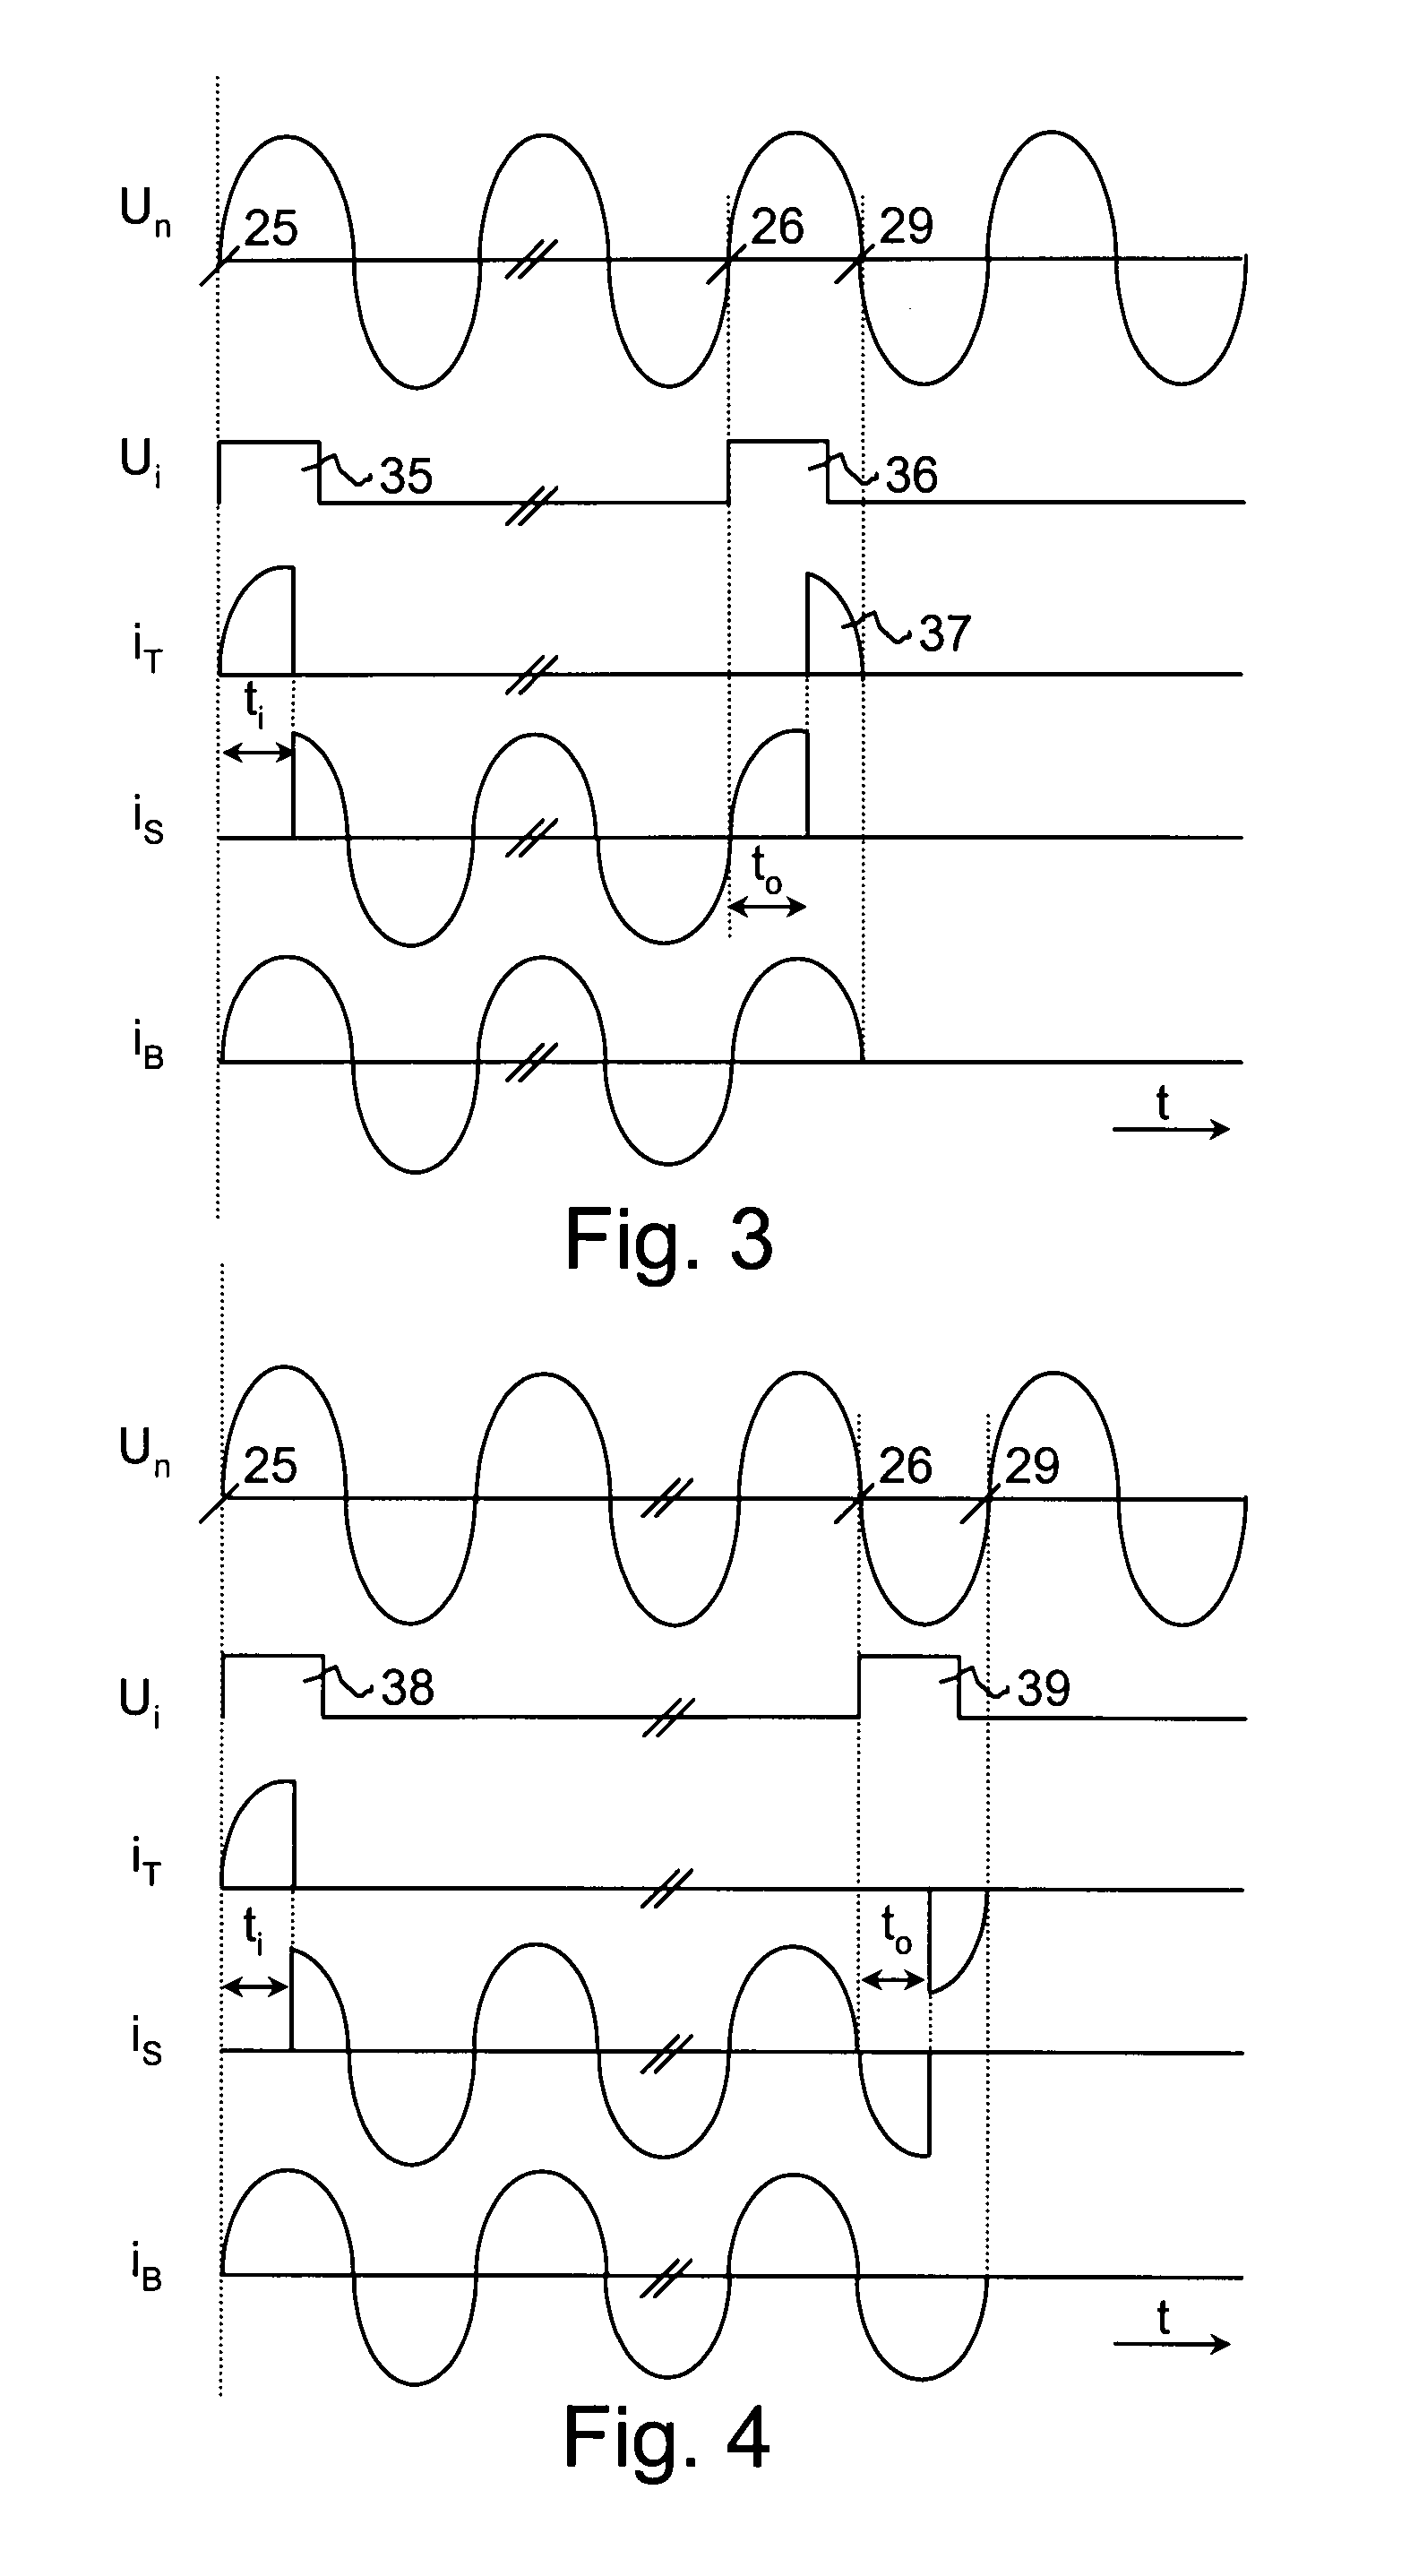 Hybrid electrical switching device